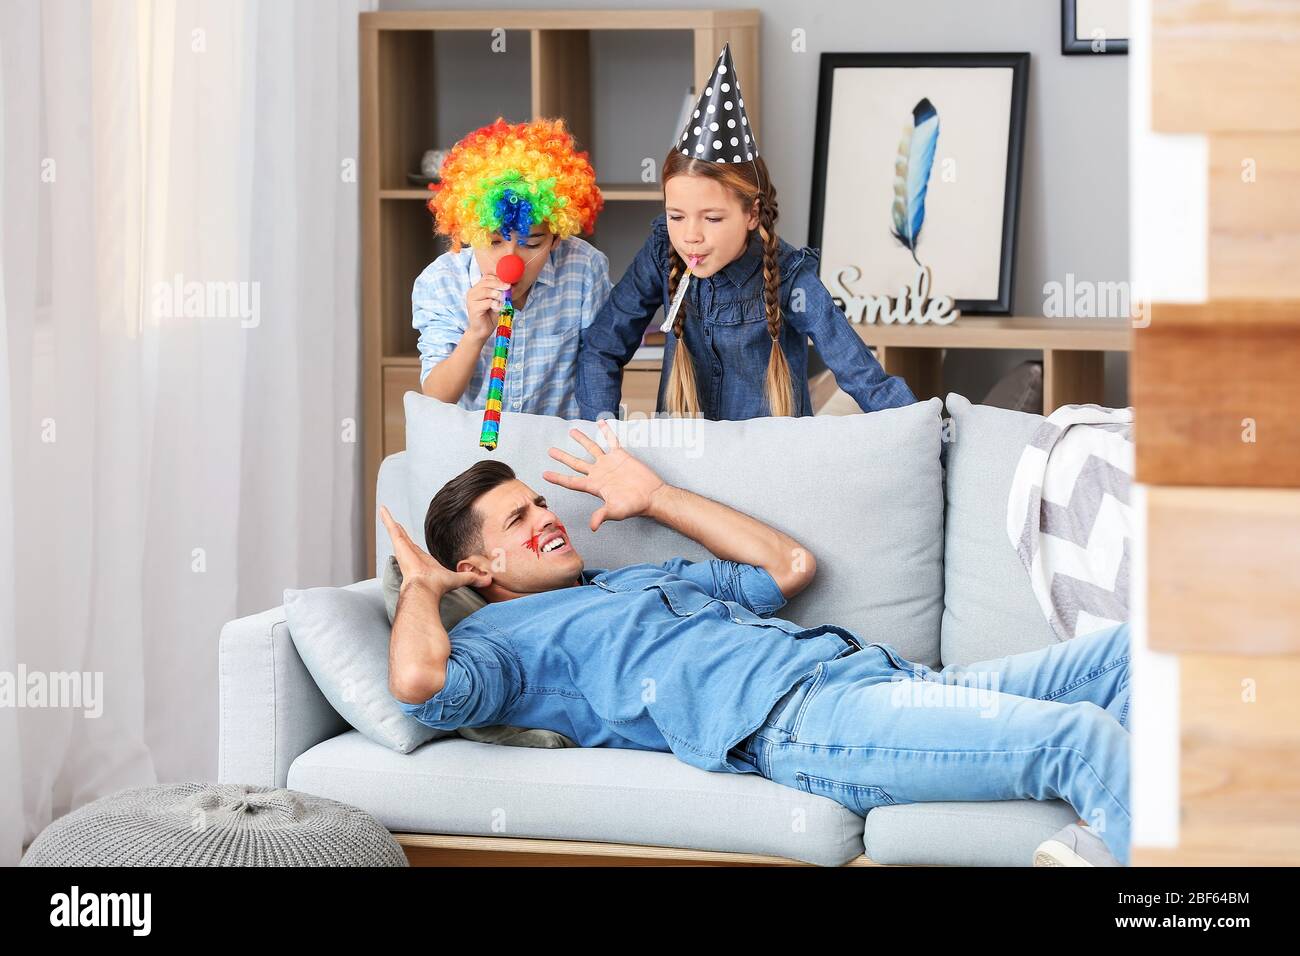 Children playing a prank on their father at home. April Fools' Day celebration Stock Photo